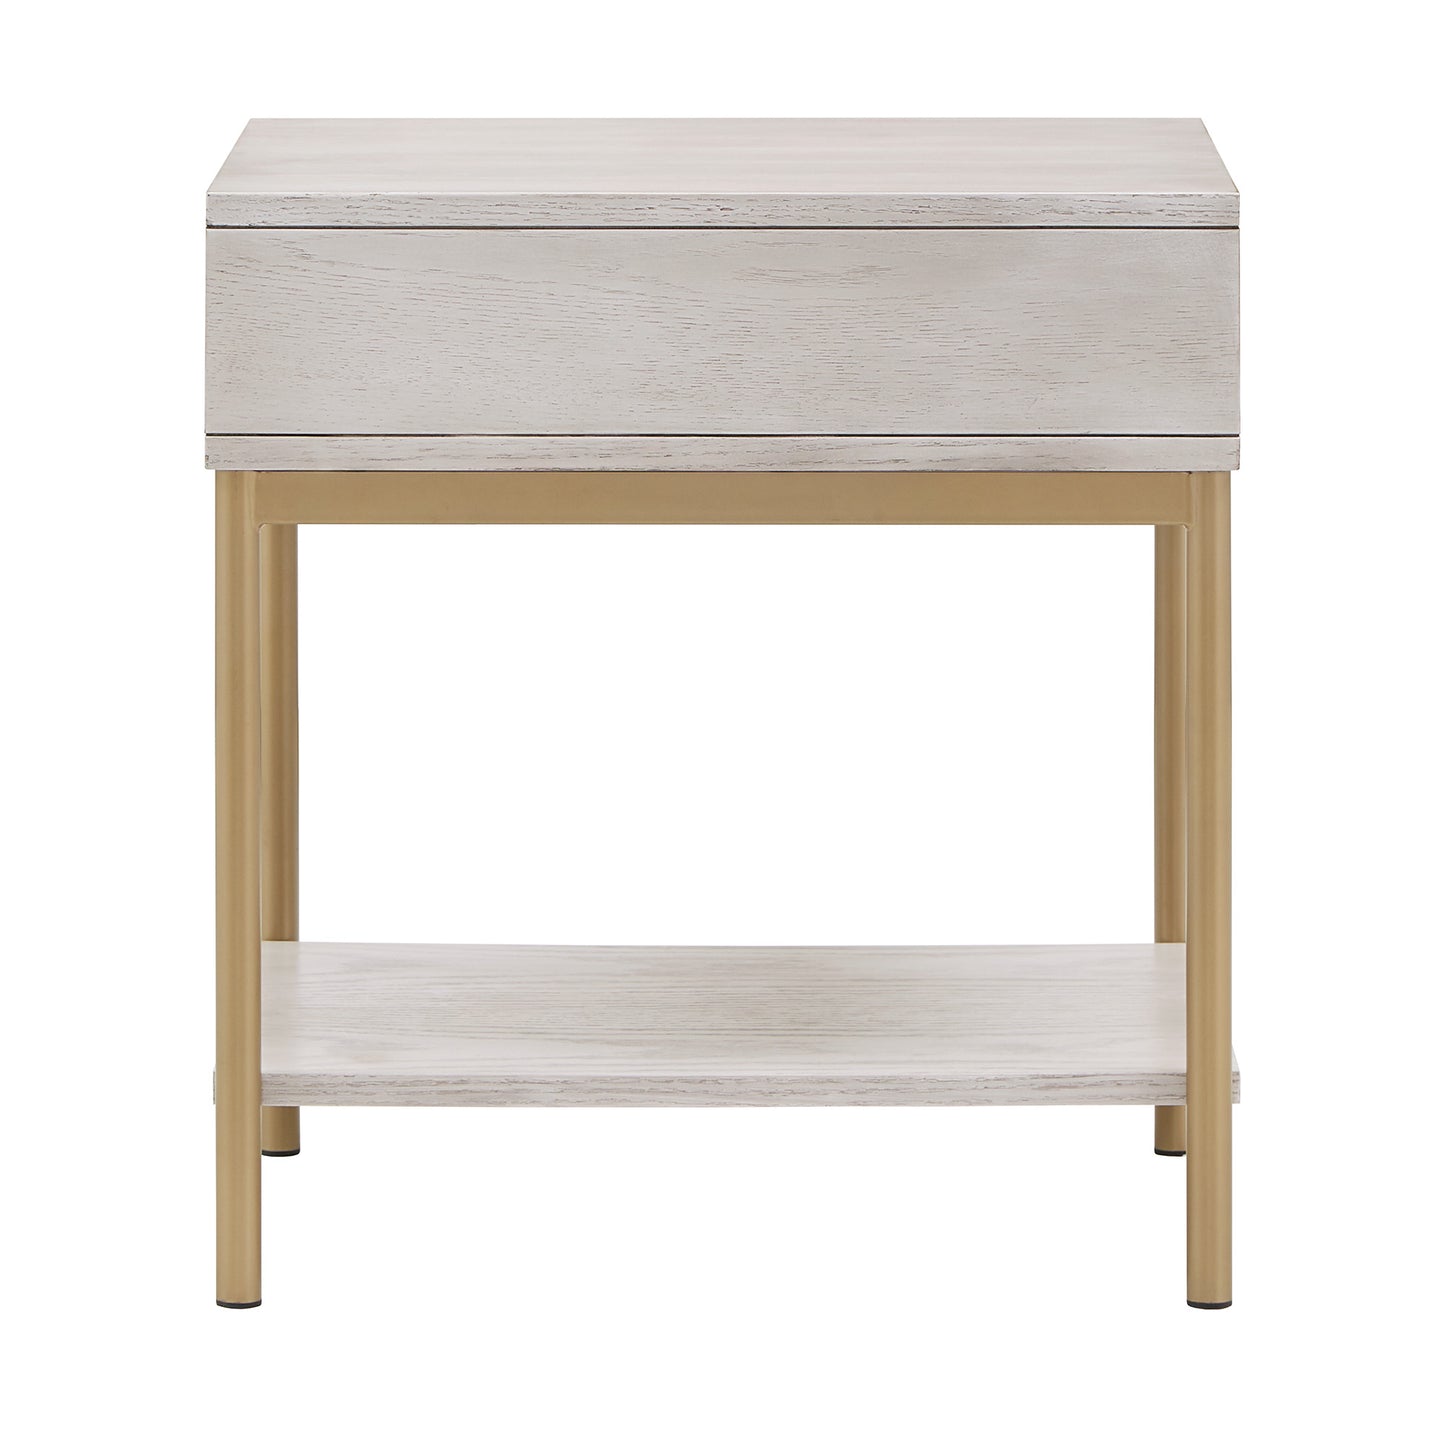 Two-Tone Rectangular End Table with USB Port - White Finish